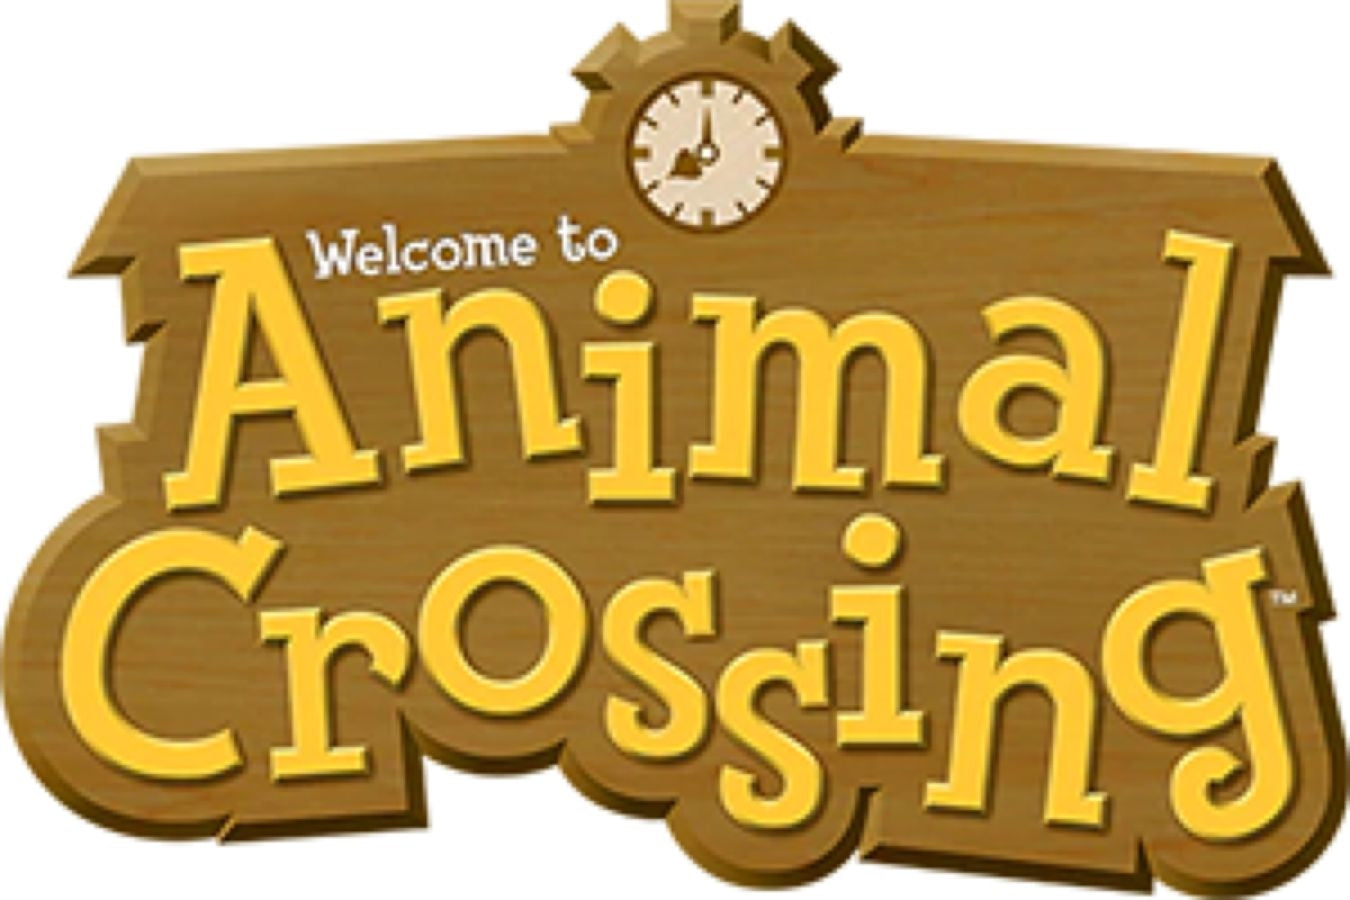 Guess Who - Animal Crossing Edition